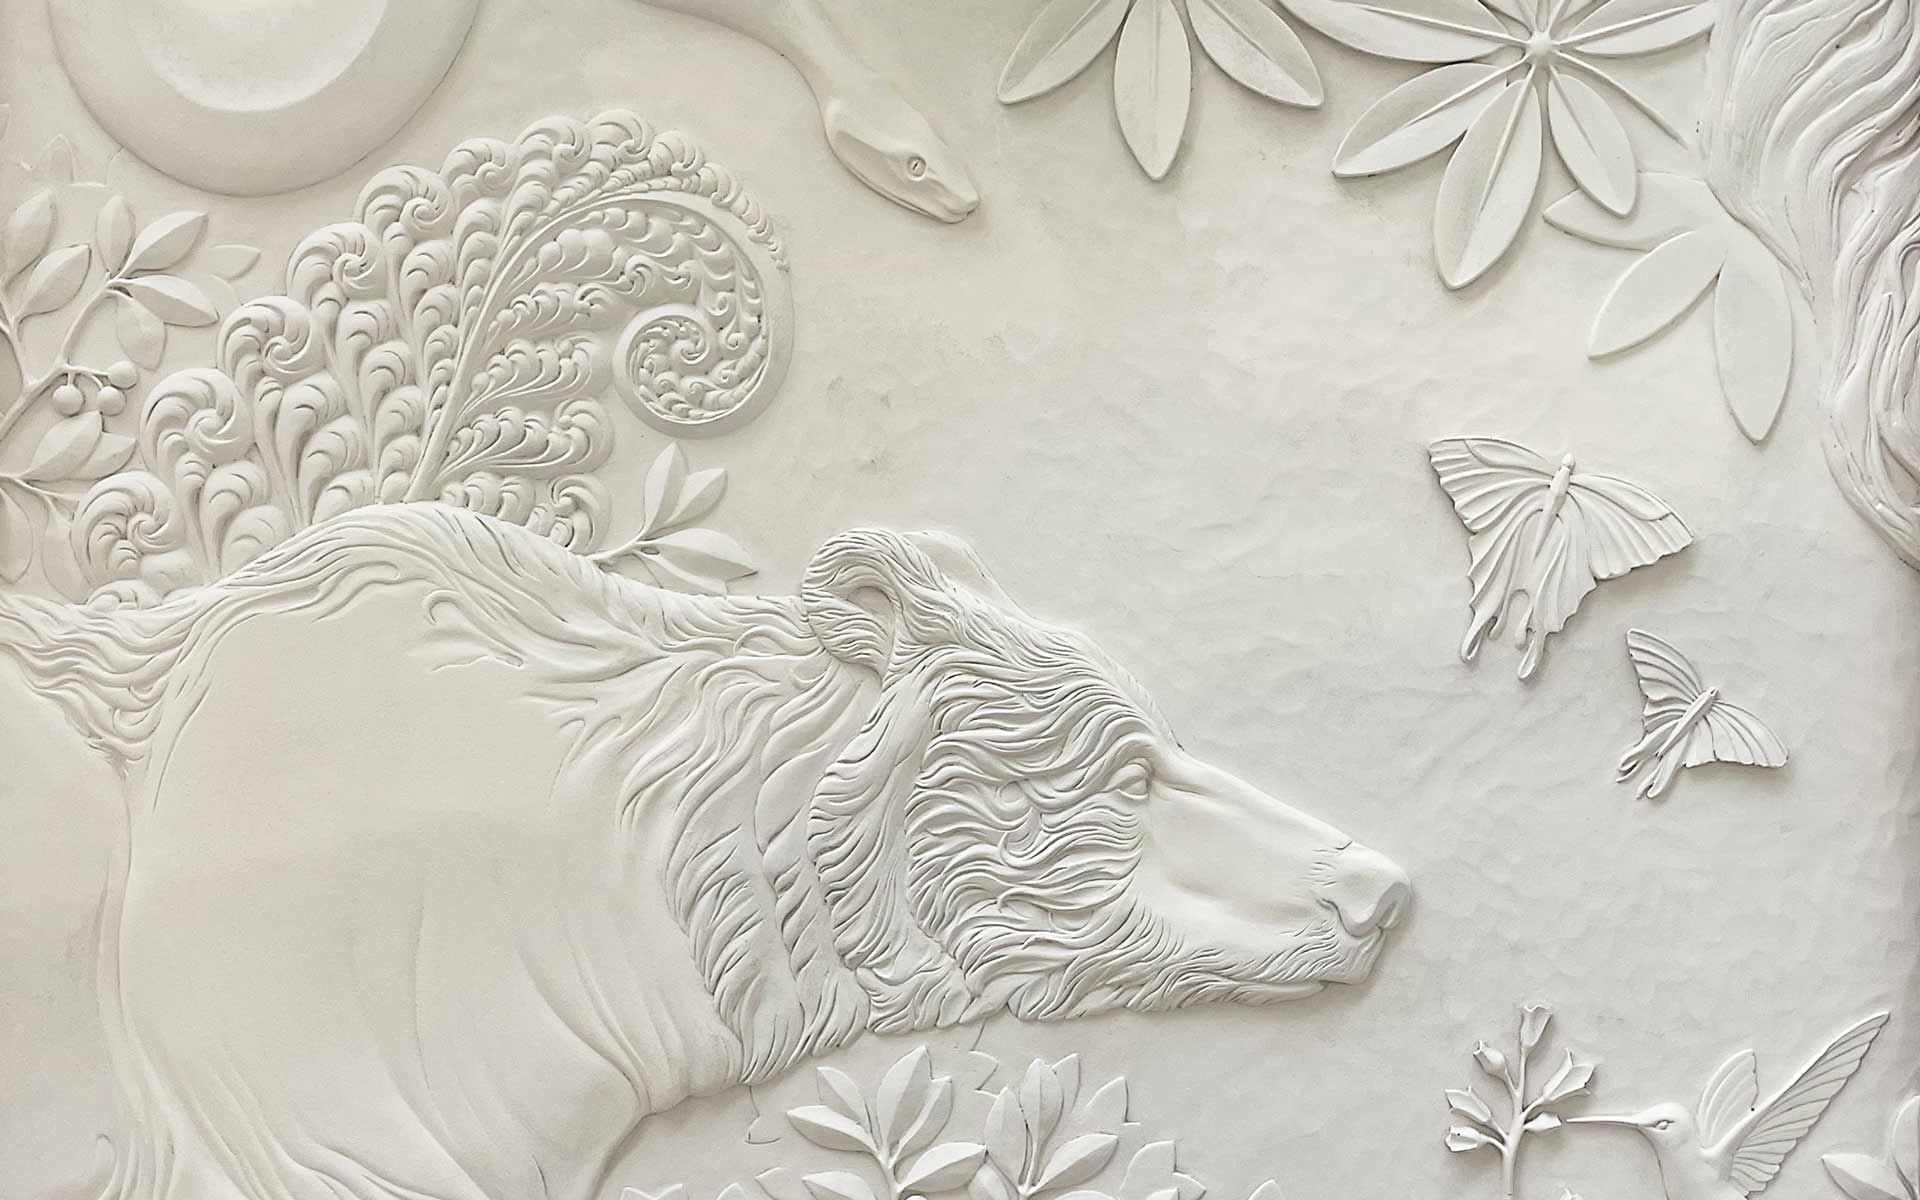 Stone finish bas-relief 'Flora and Fauna'. Project by M Design. Photo by DKT Artworks.